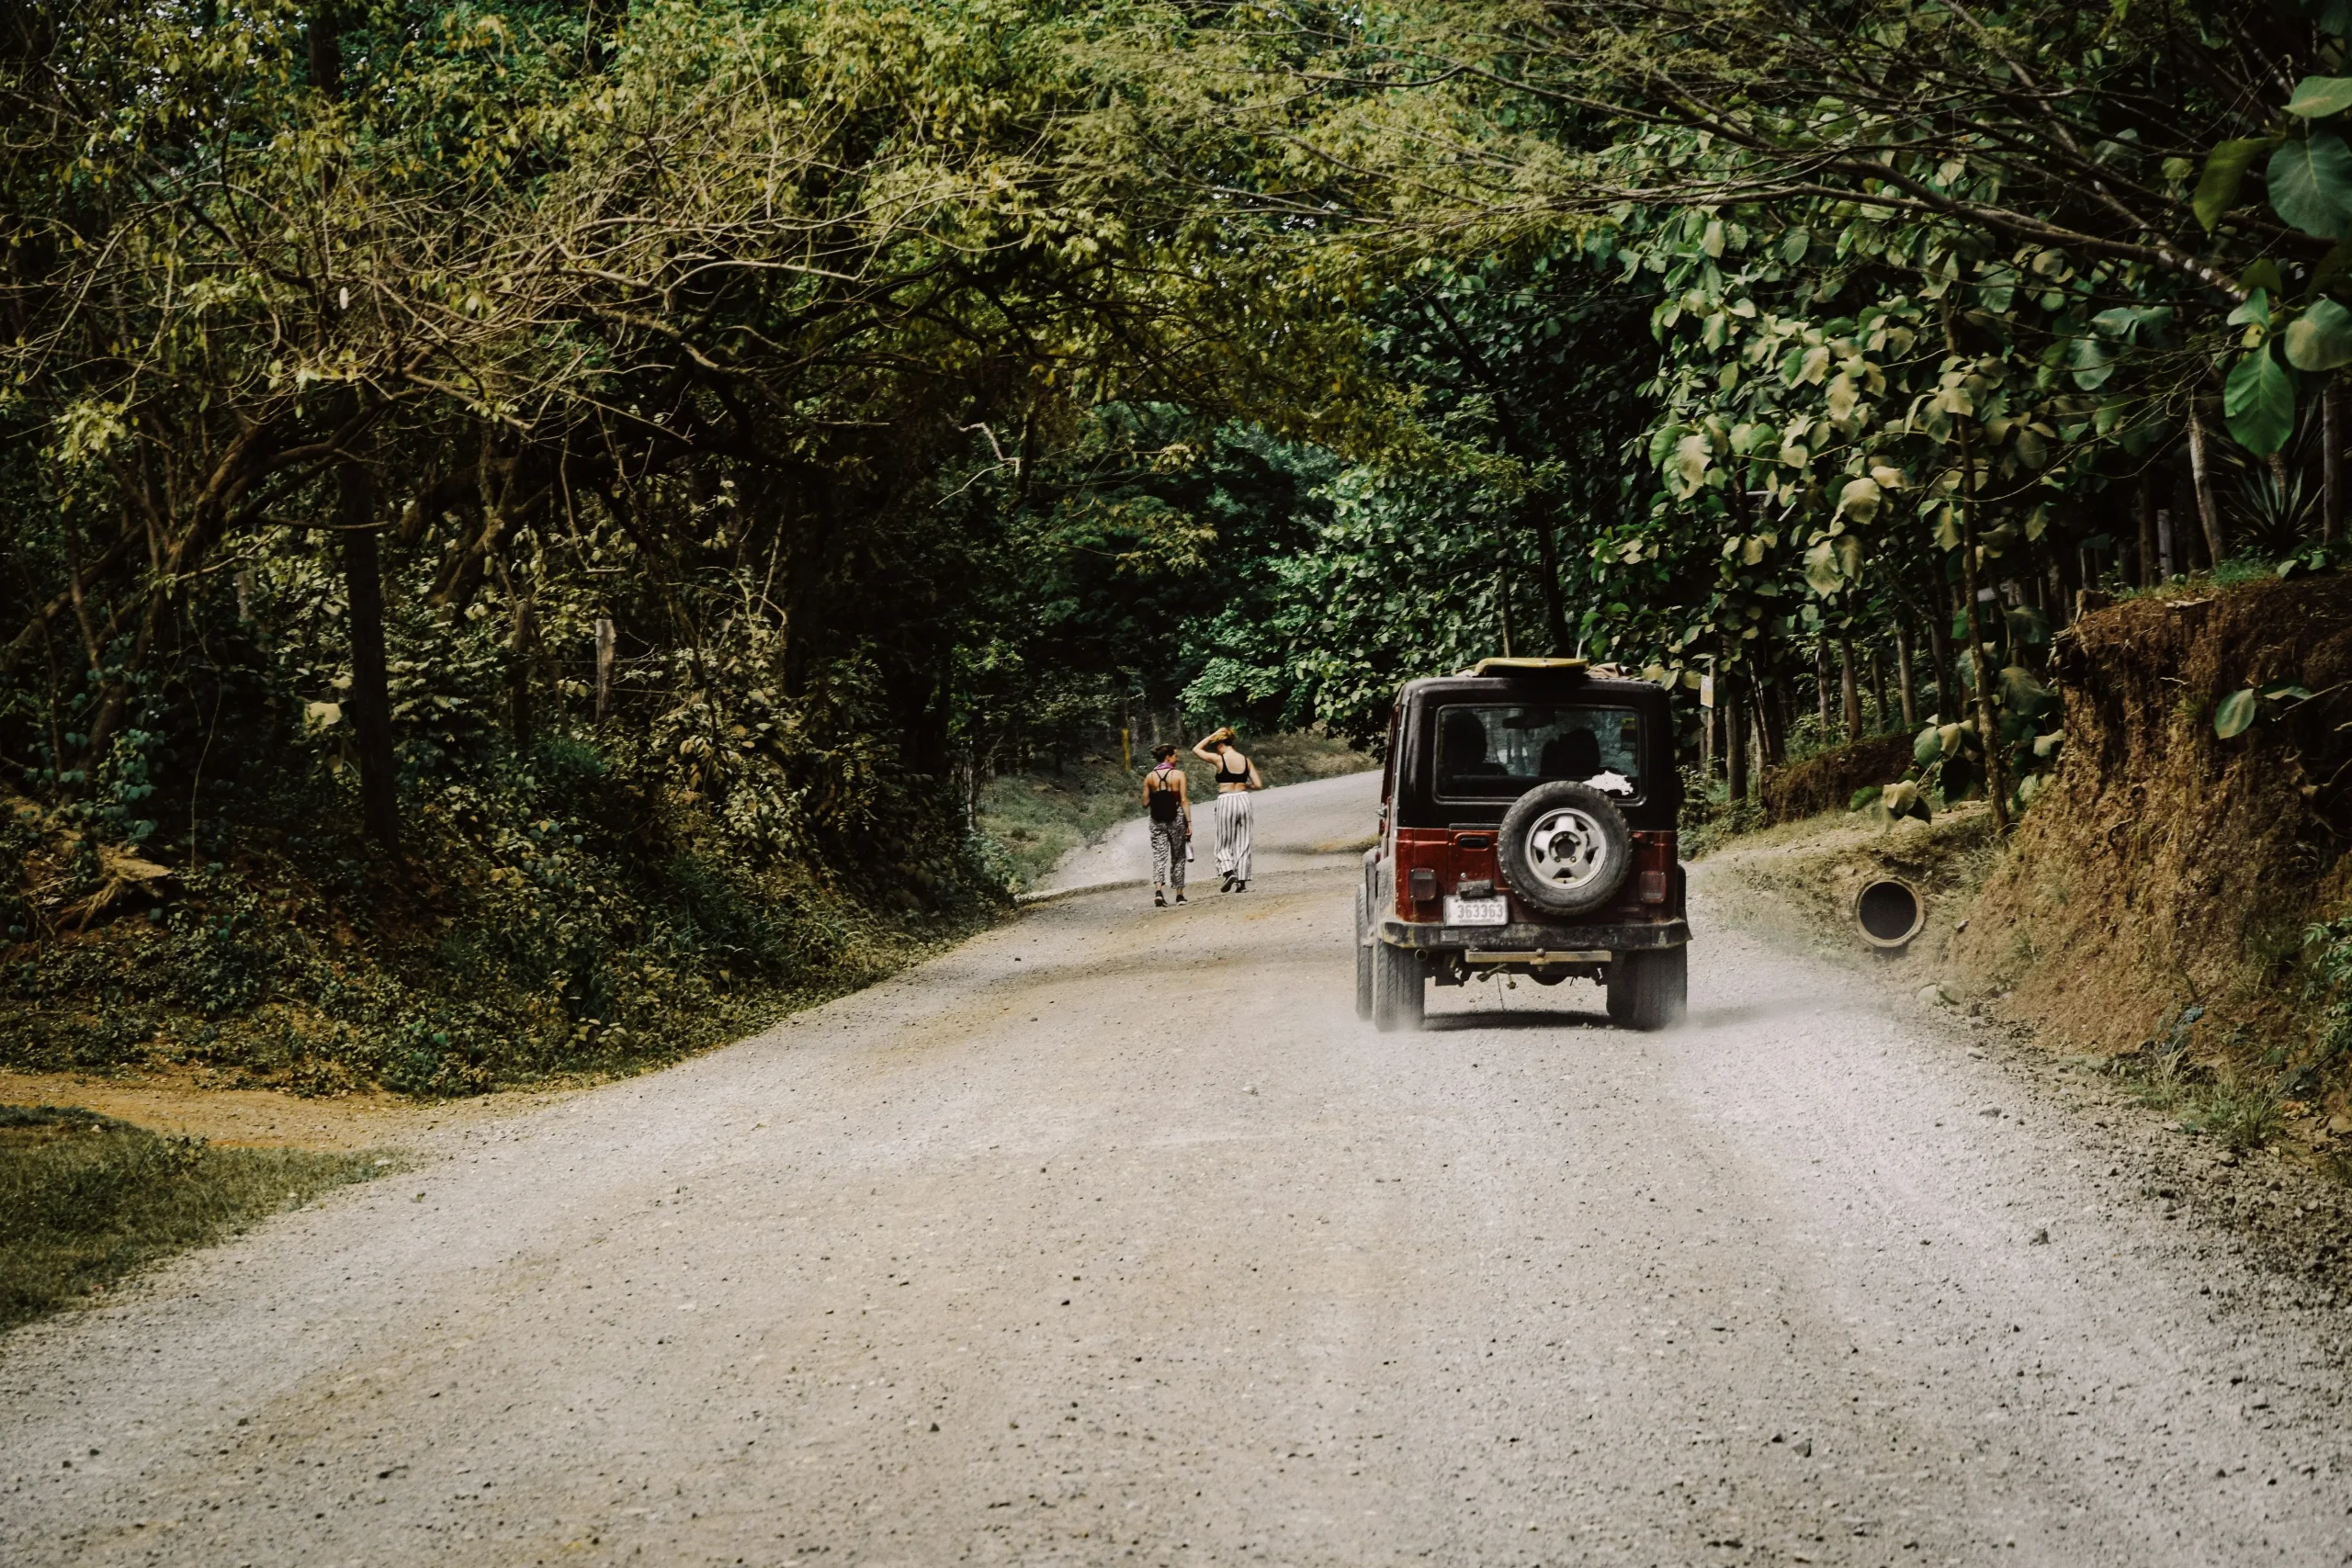 Rental car driving on a dirt road surrounded by lush greenery near a boutique hotel in Uvita, Costa Rica, with two people walking ahead. Ideal for a wellness retreat in Uvita, Costa Rica.